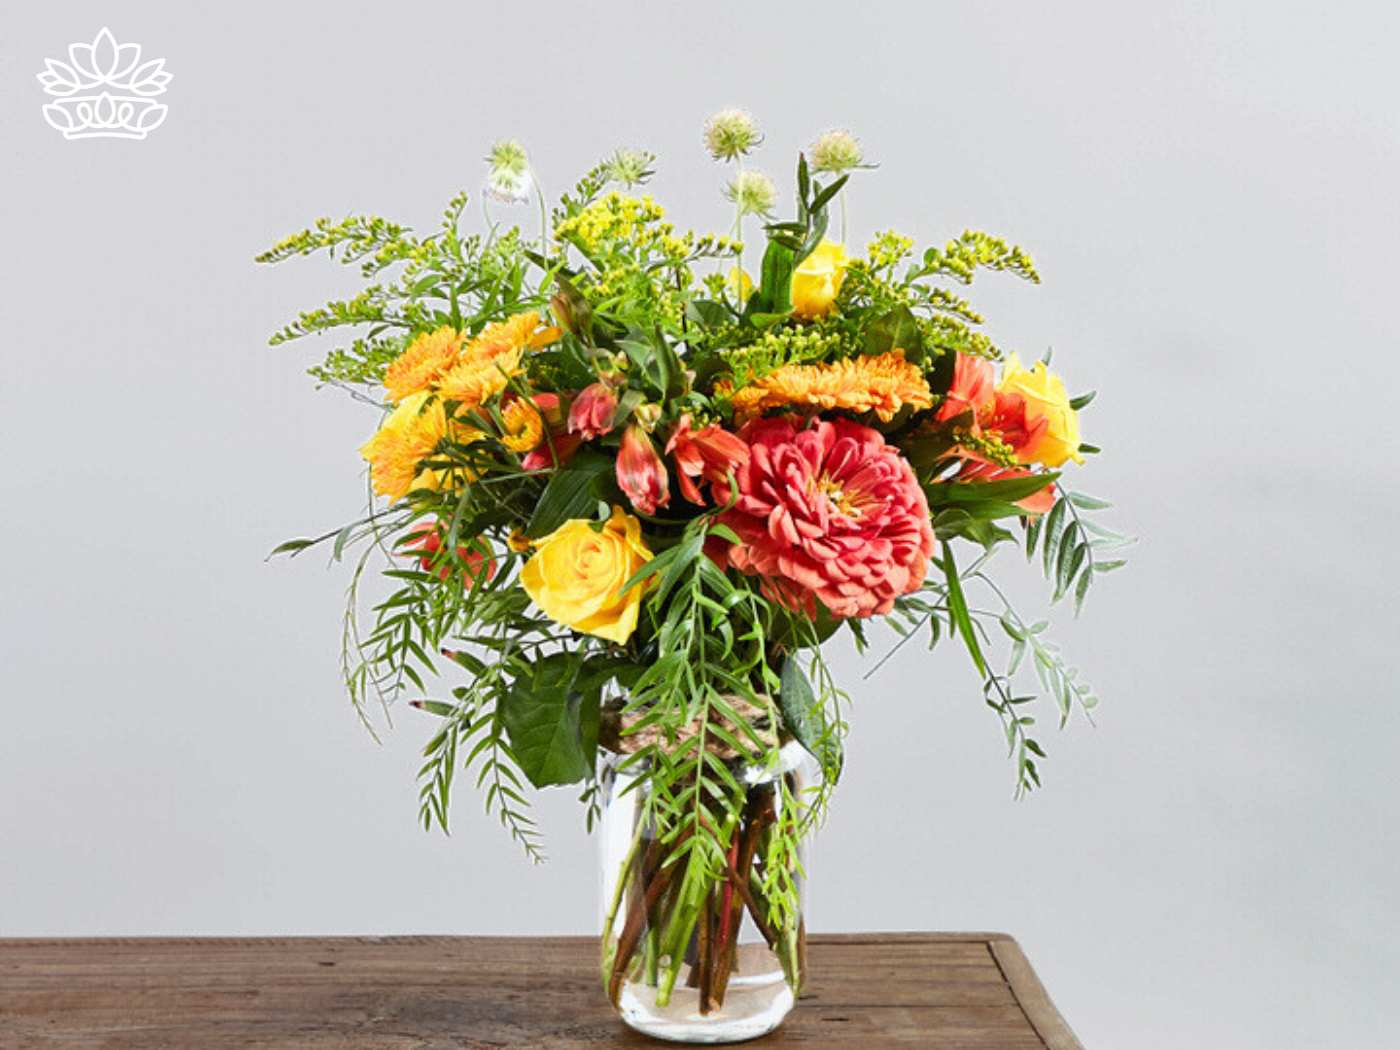 A vibrant floral arrangement of orange and yellow flowers with lush greenery, displayed in a clear glass vase on a wooden surface. Fabulous Flowers and Gifts. Gifts for Him. Delivered with Heart.